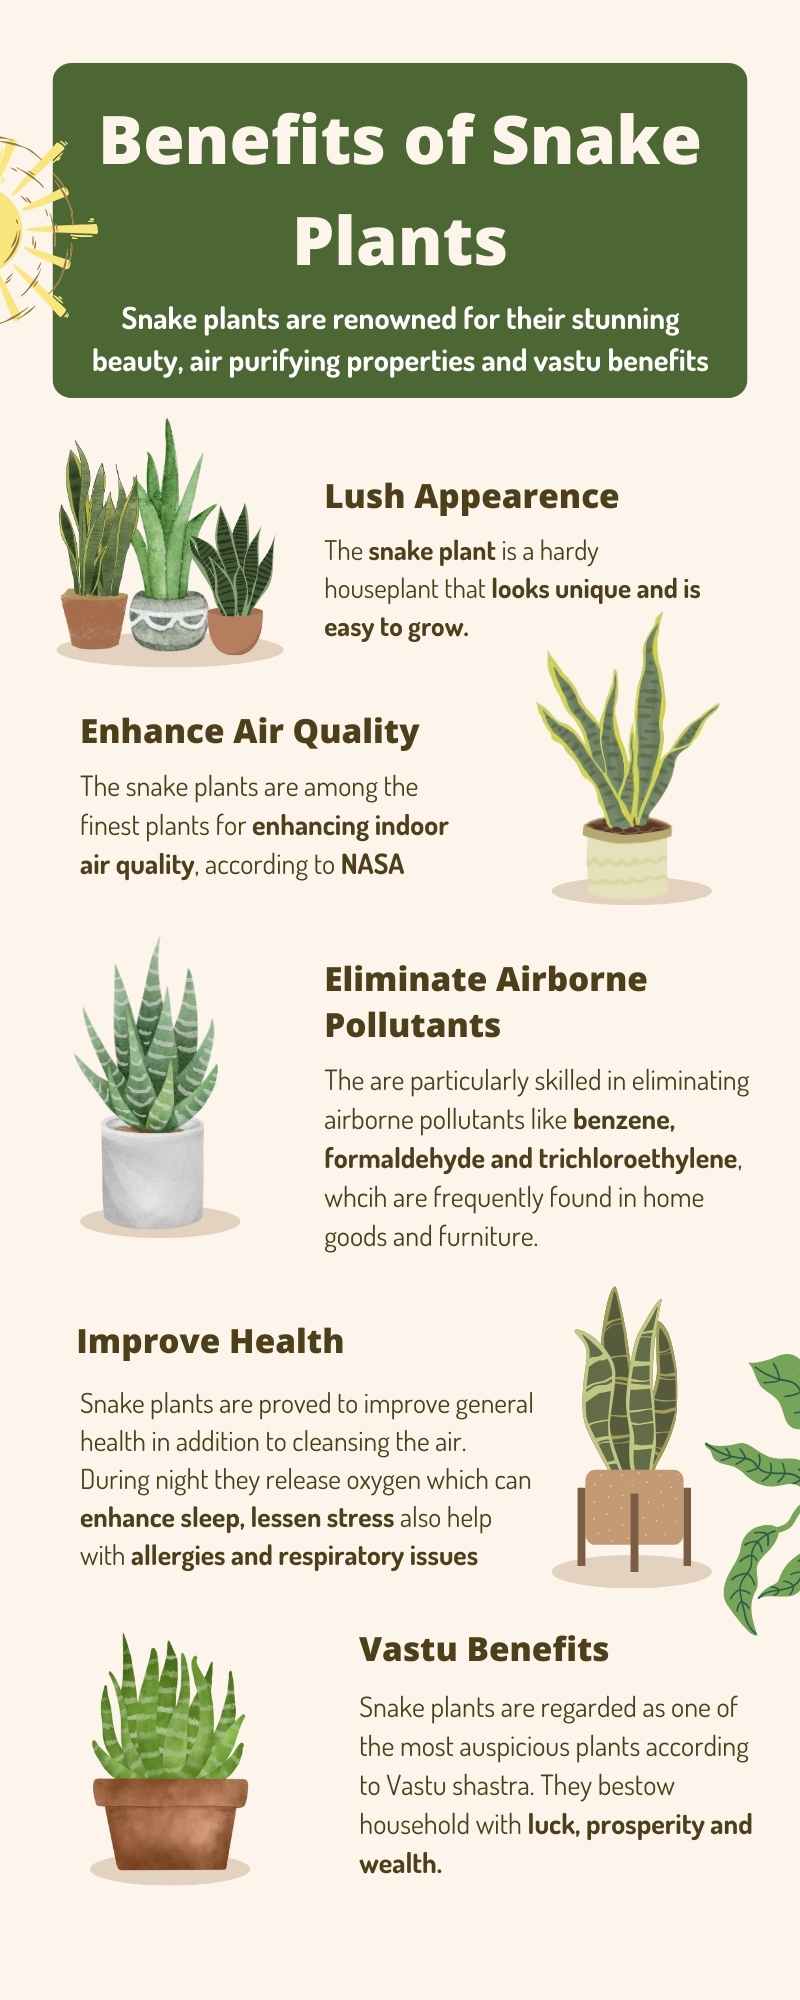 Different Benefits of Snake Plants